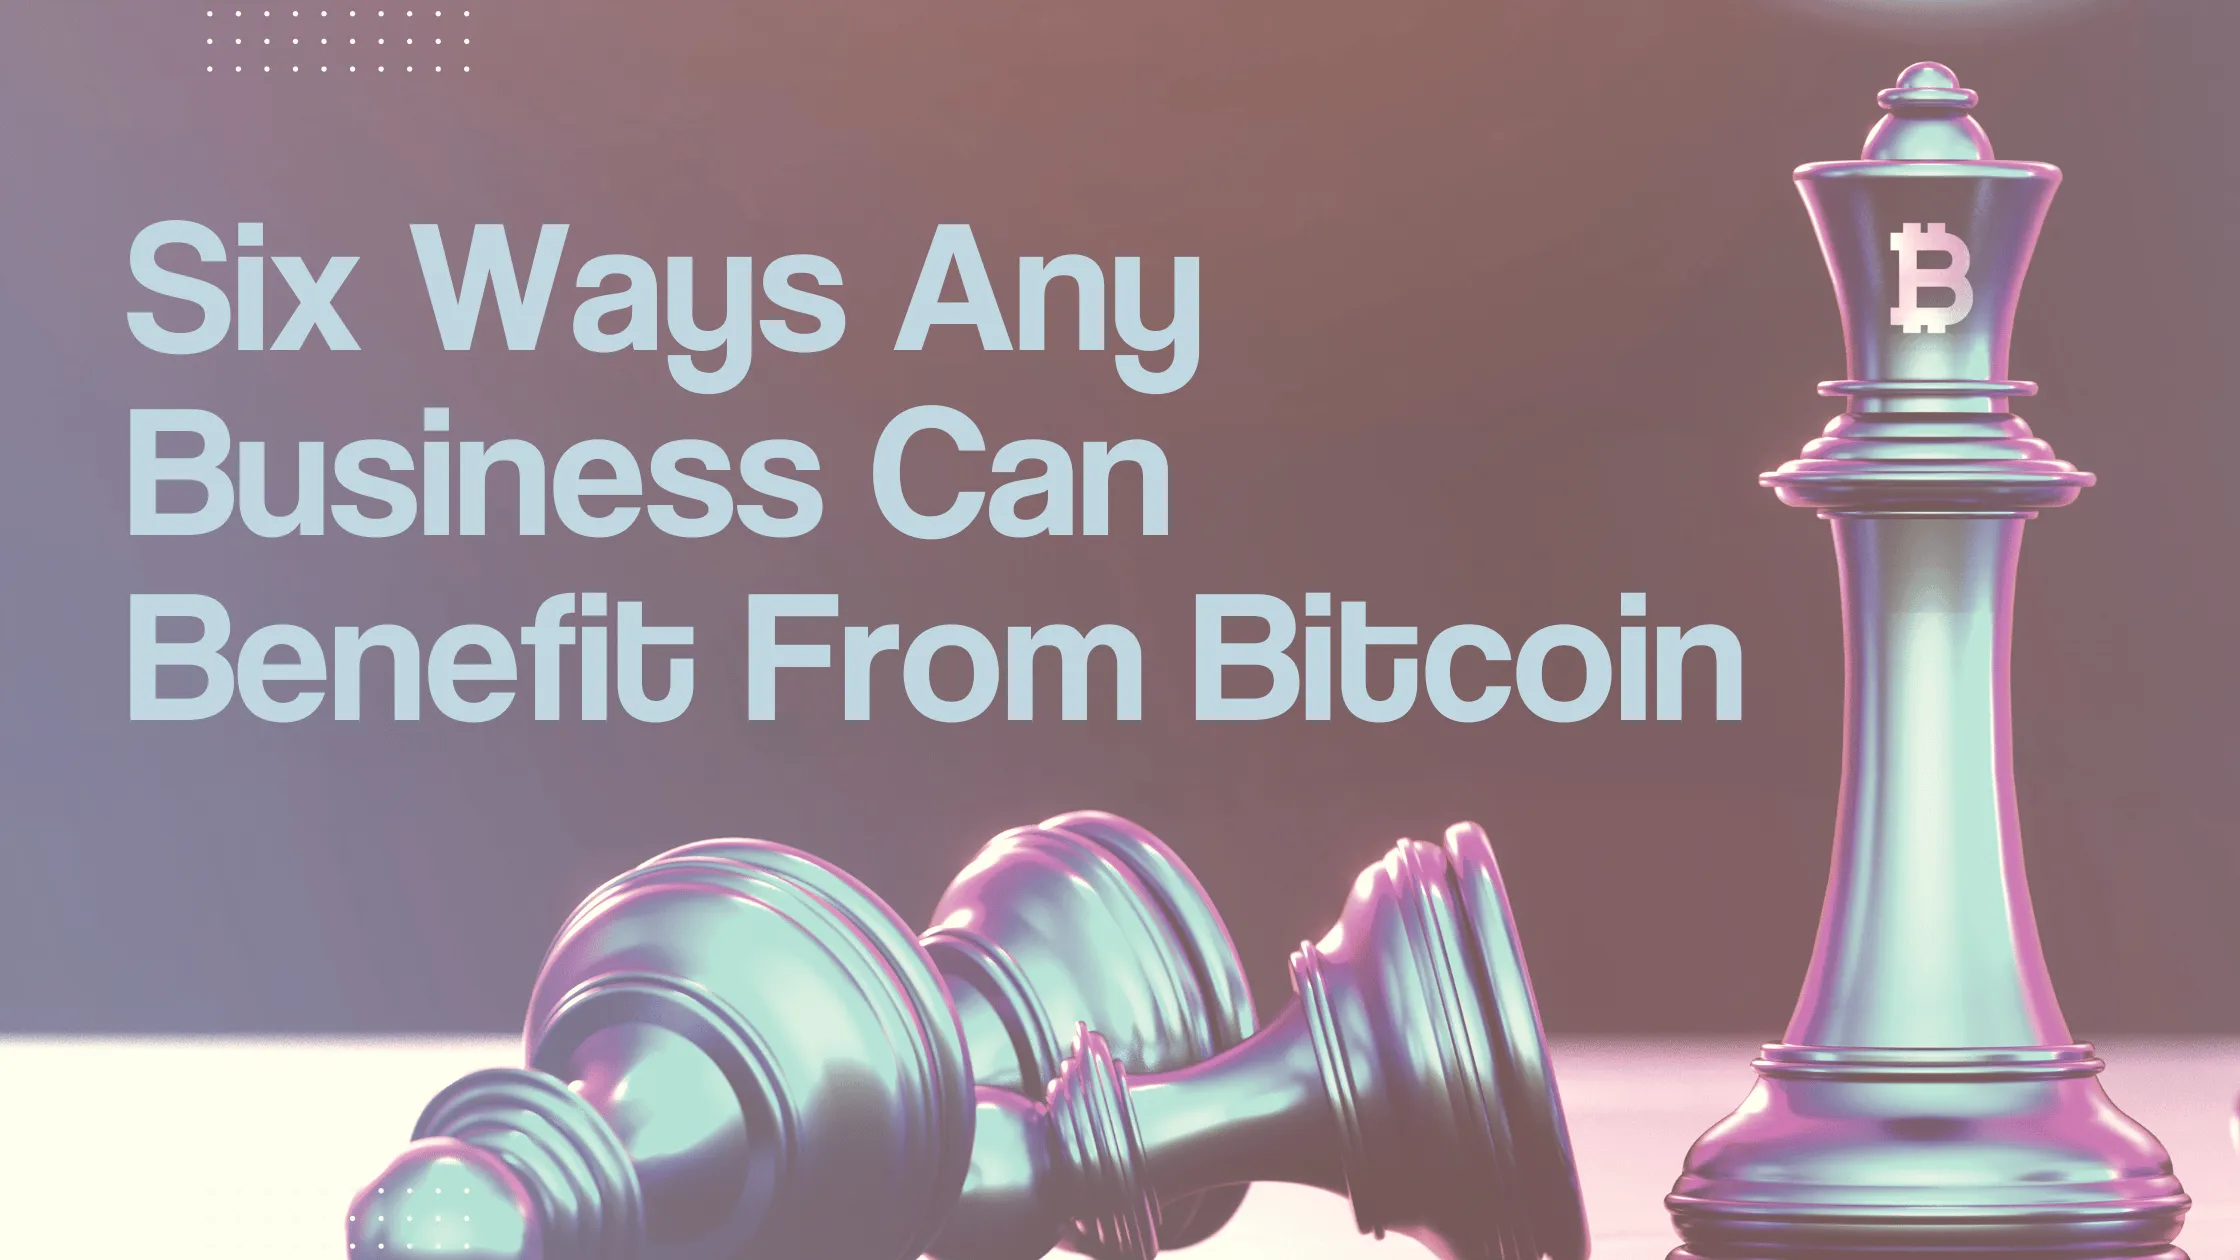 Six ways any business can benefit from Bitcoin